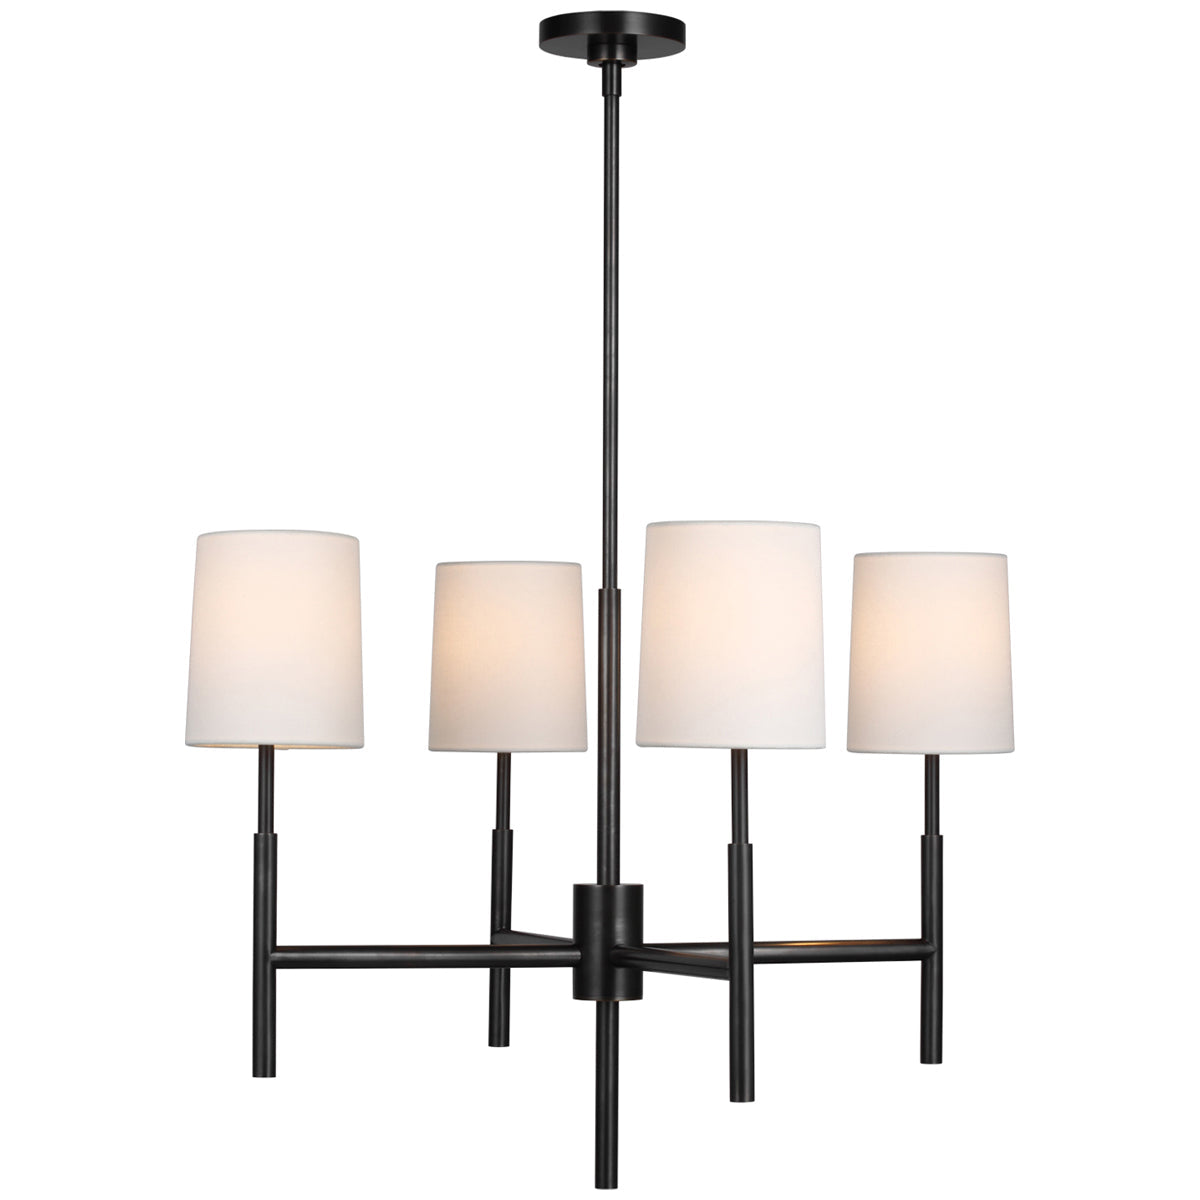 Visual Comfort Clarion Small Chandelier